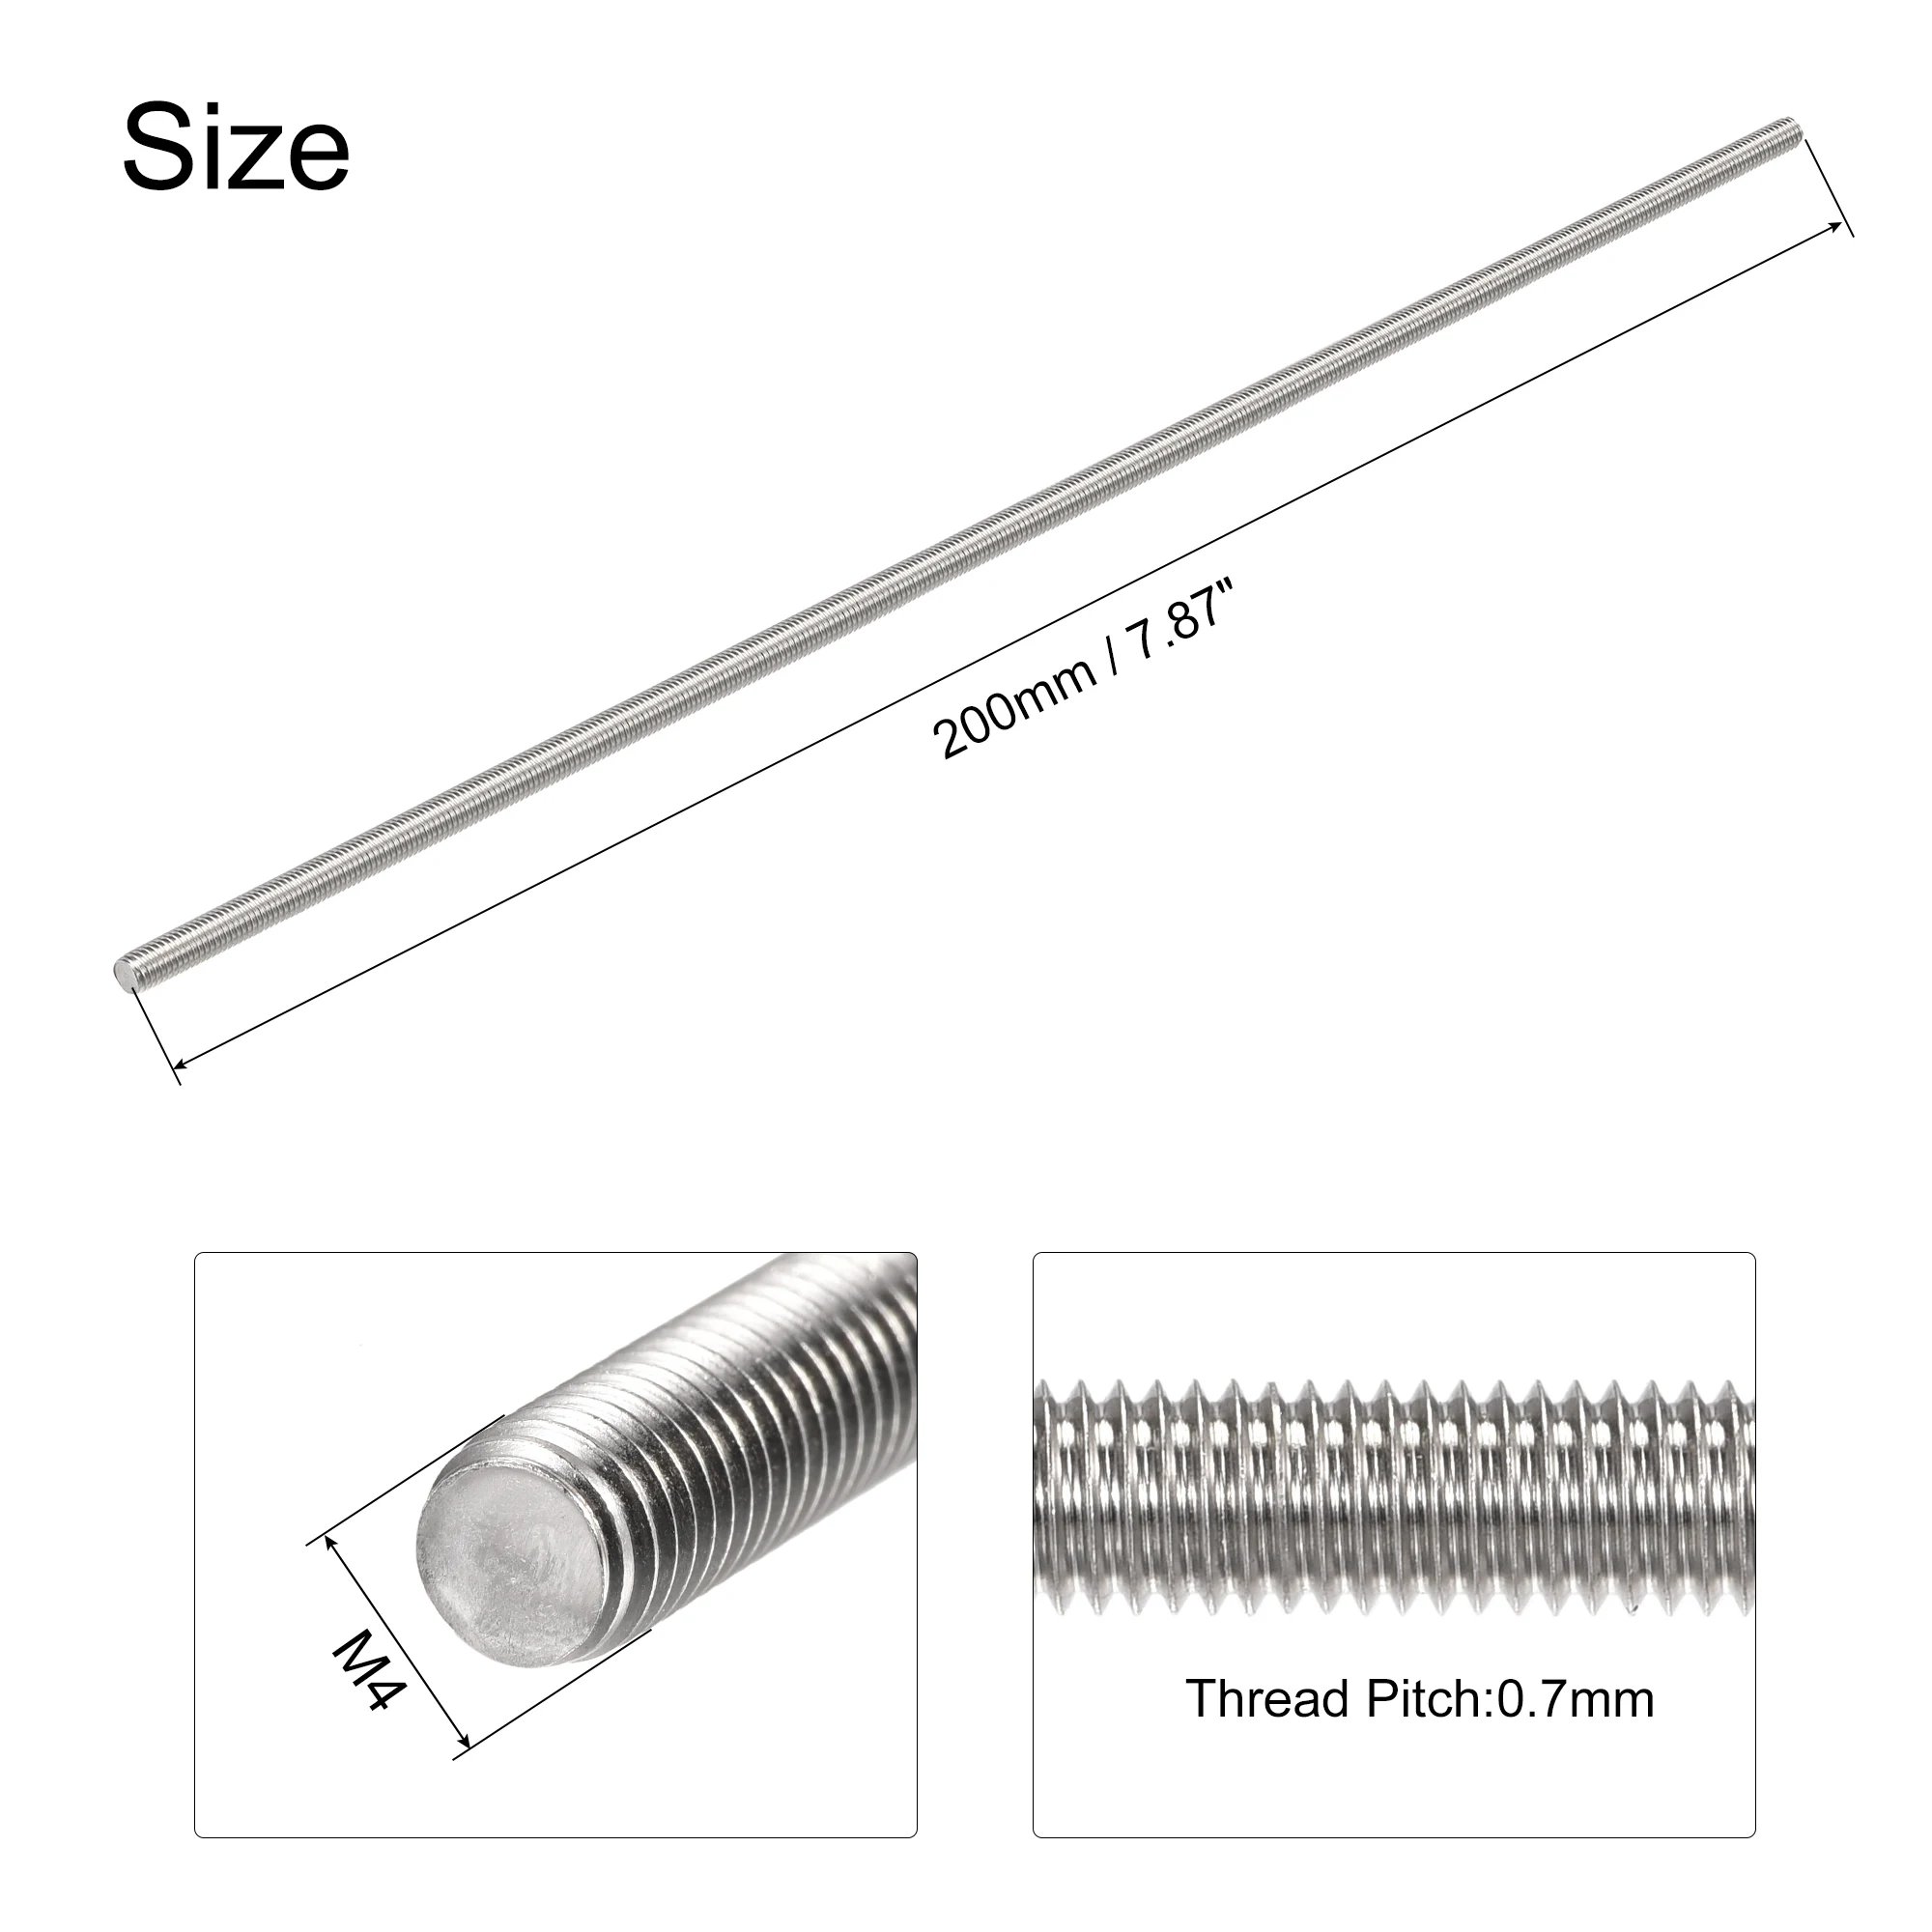 uxcell® M2 x 250mm Fully Threaded Rod 304 Stainless Steel Right Hand Threads 